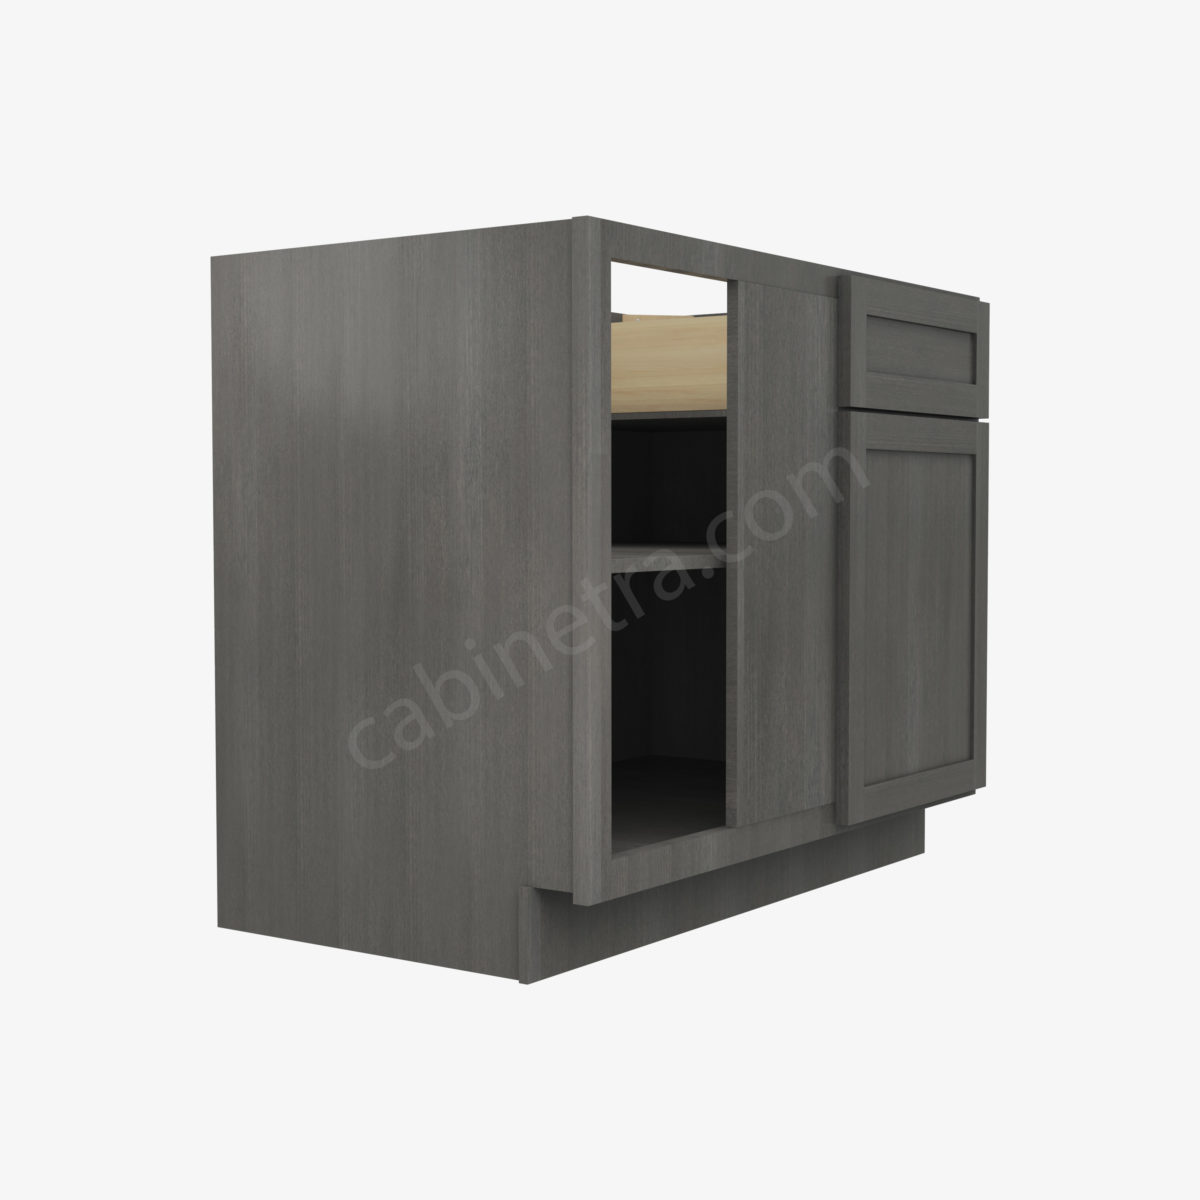 AG BBLC42 45 39W 4 Forevermark Greystone Shaker Cabinetra scaled